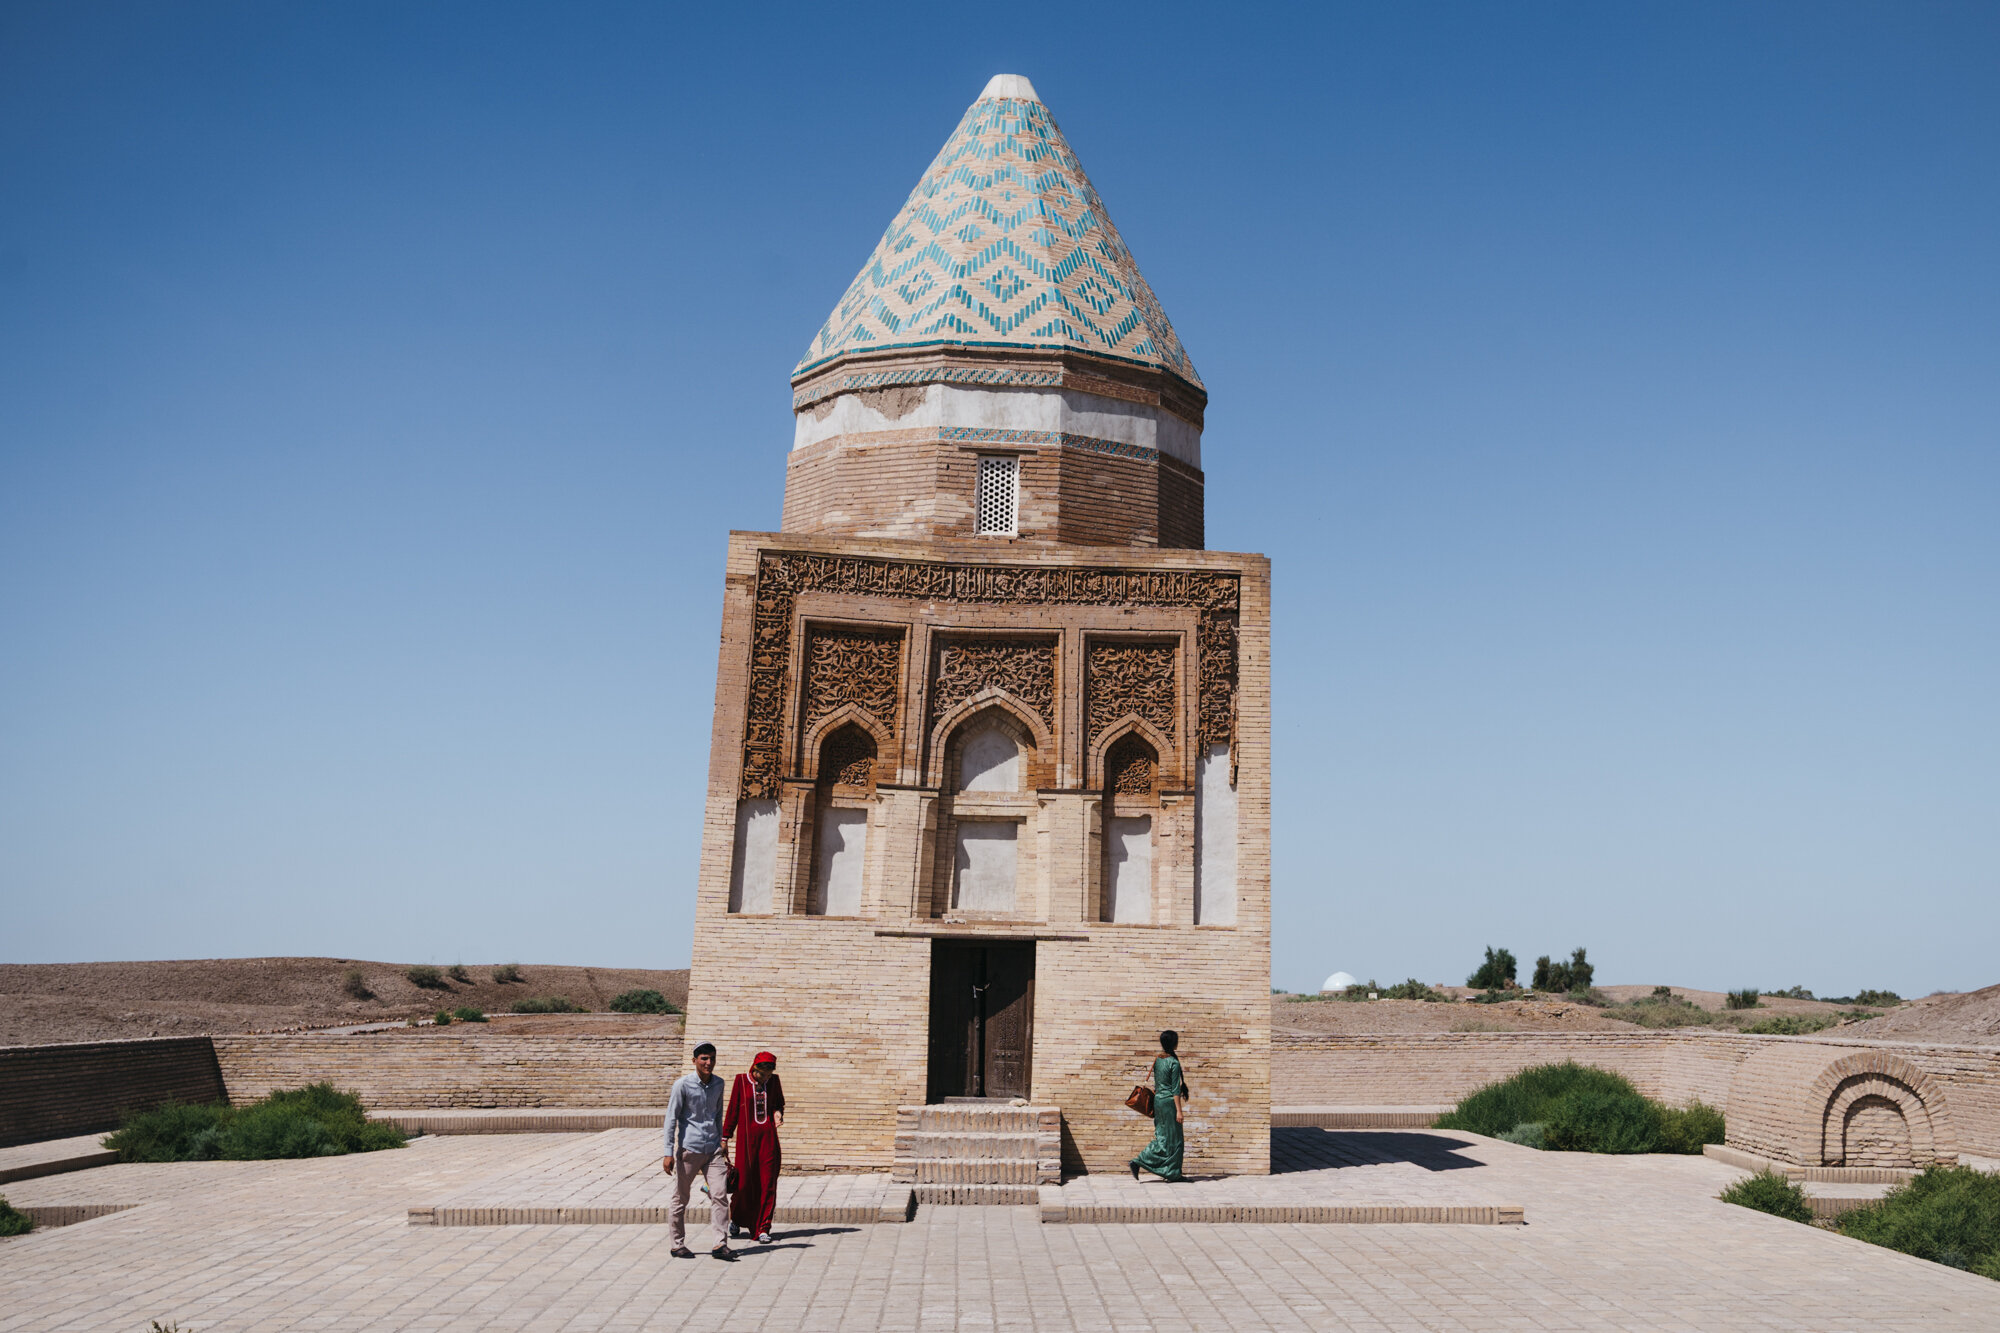  The Il-Arslan mausoleum. The architectural style developed in Konye Urgench influenced numerous other Muslim civilisations including the Timurids in modern day Uzbekistan. A multitude of buildings in  Samarkand  were erected by builders and architec